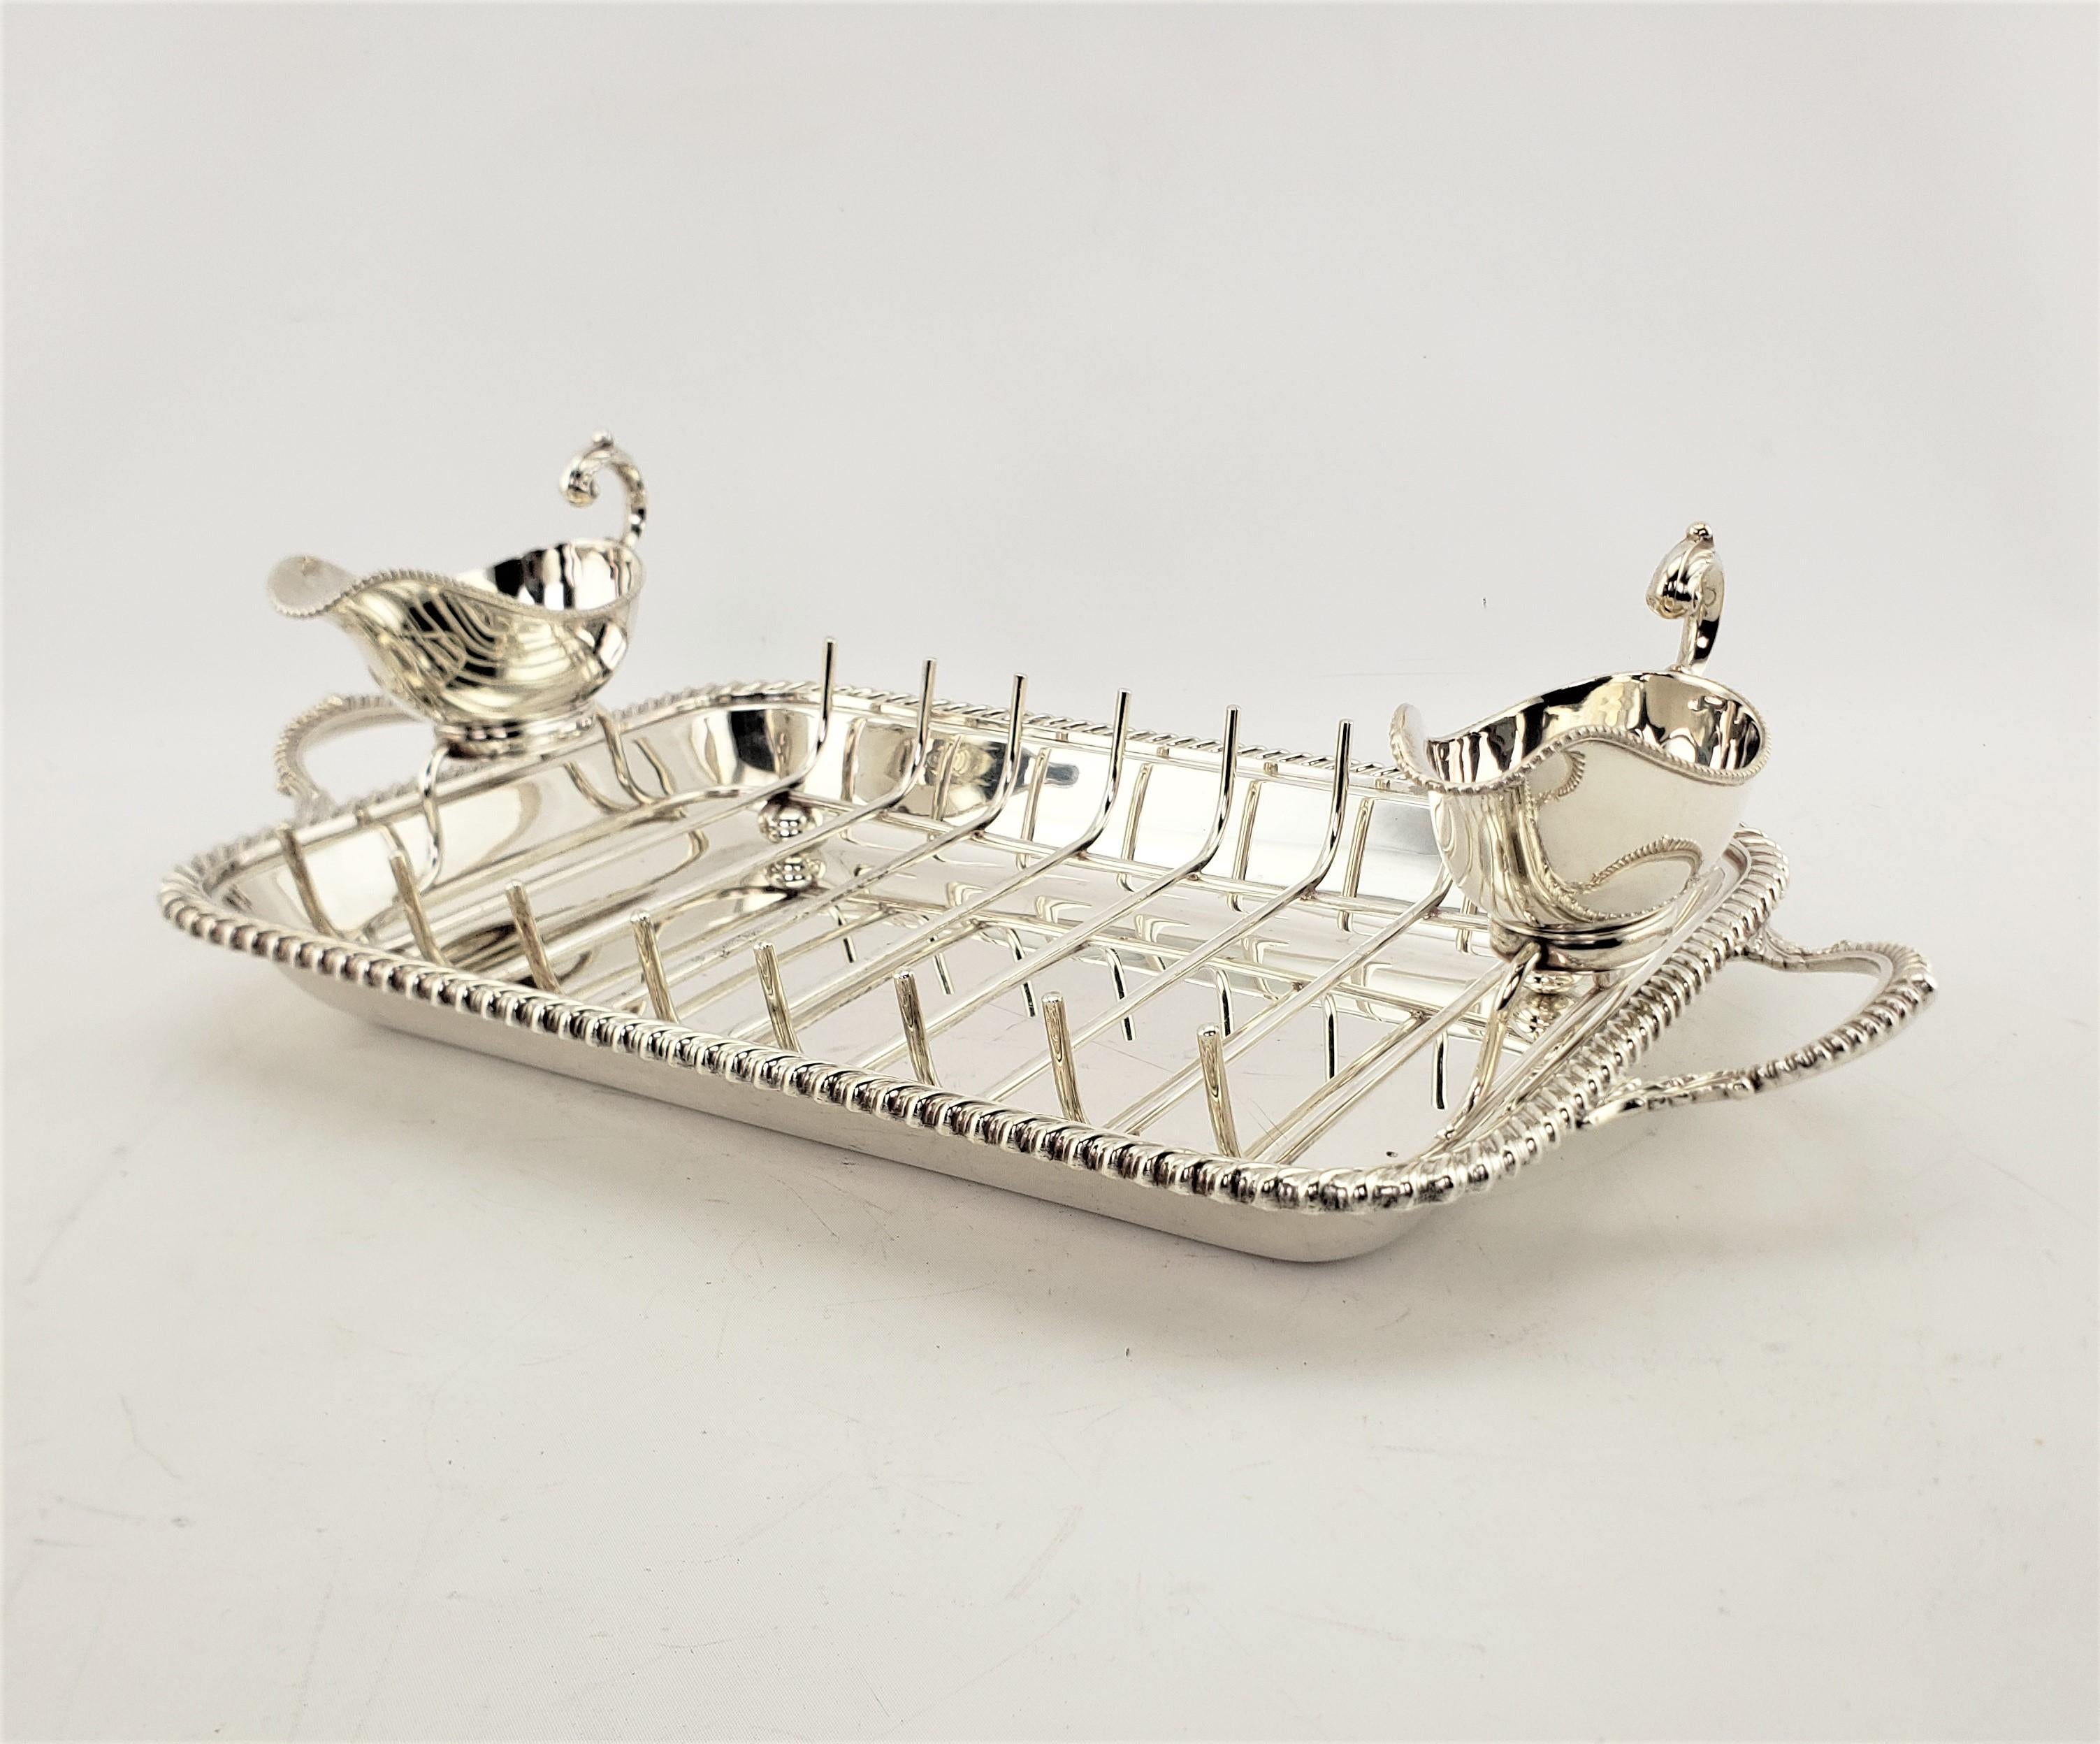 This antique well made silver plated asparagus service or meat server originated from England and made for the renowned Canadian Birks department store chain and dates to approximately 1900 and done in a Victorian style. The set is composed of a